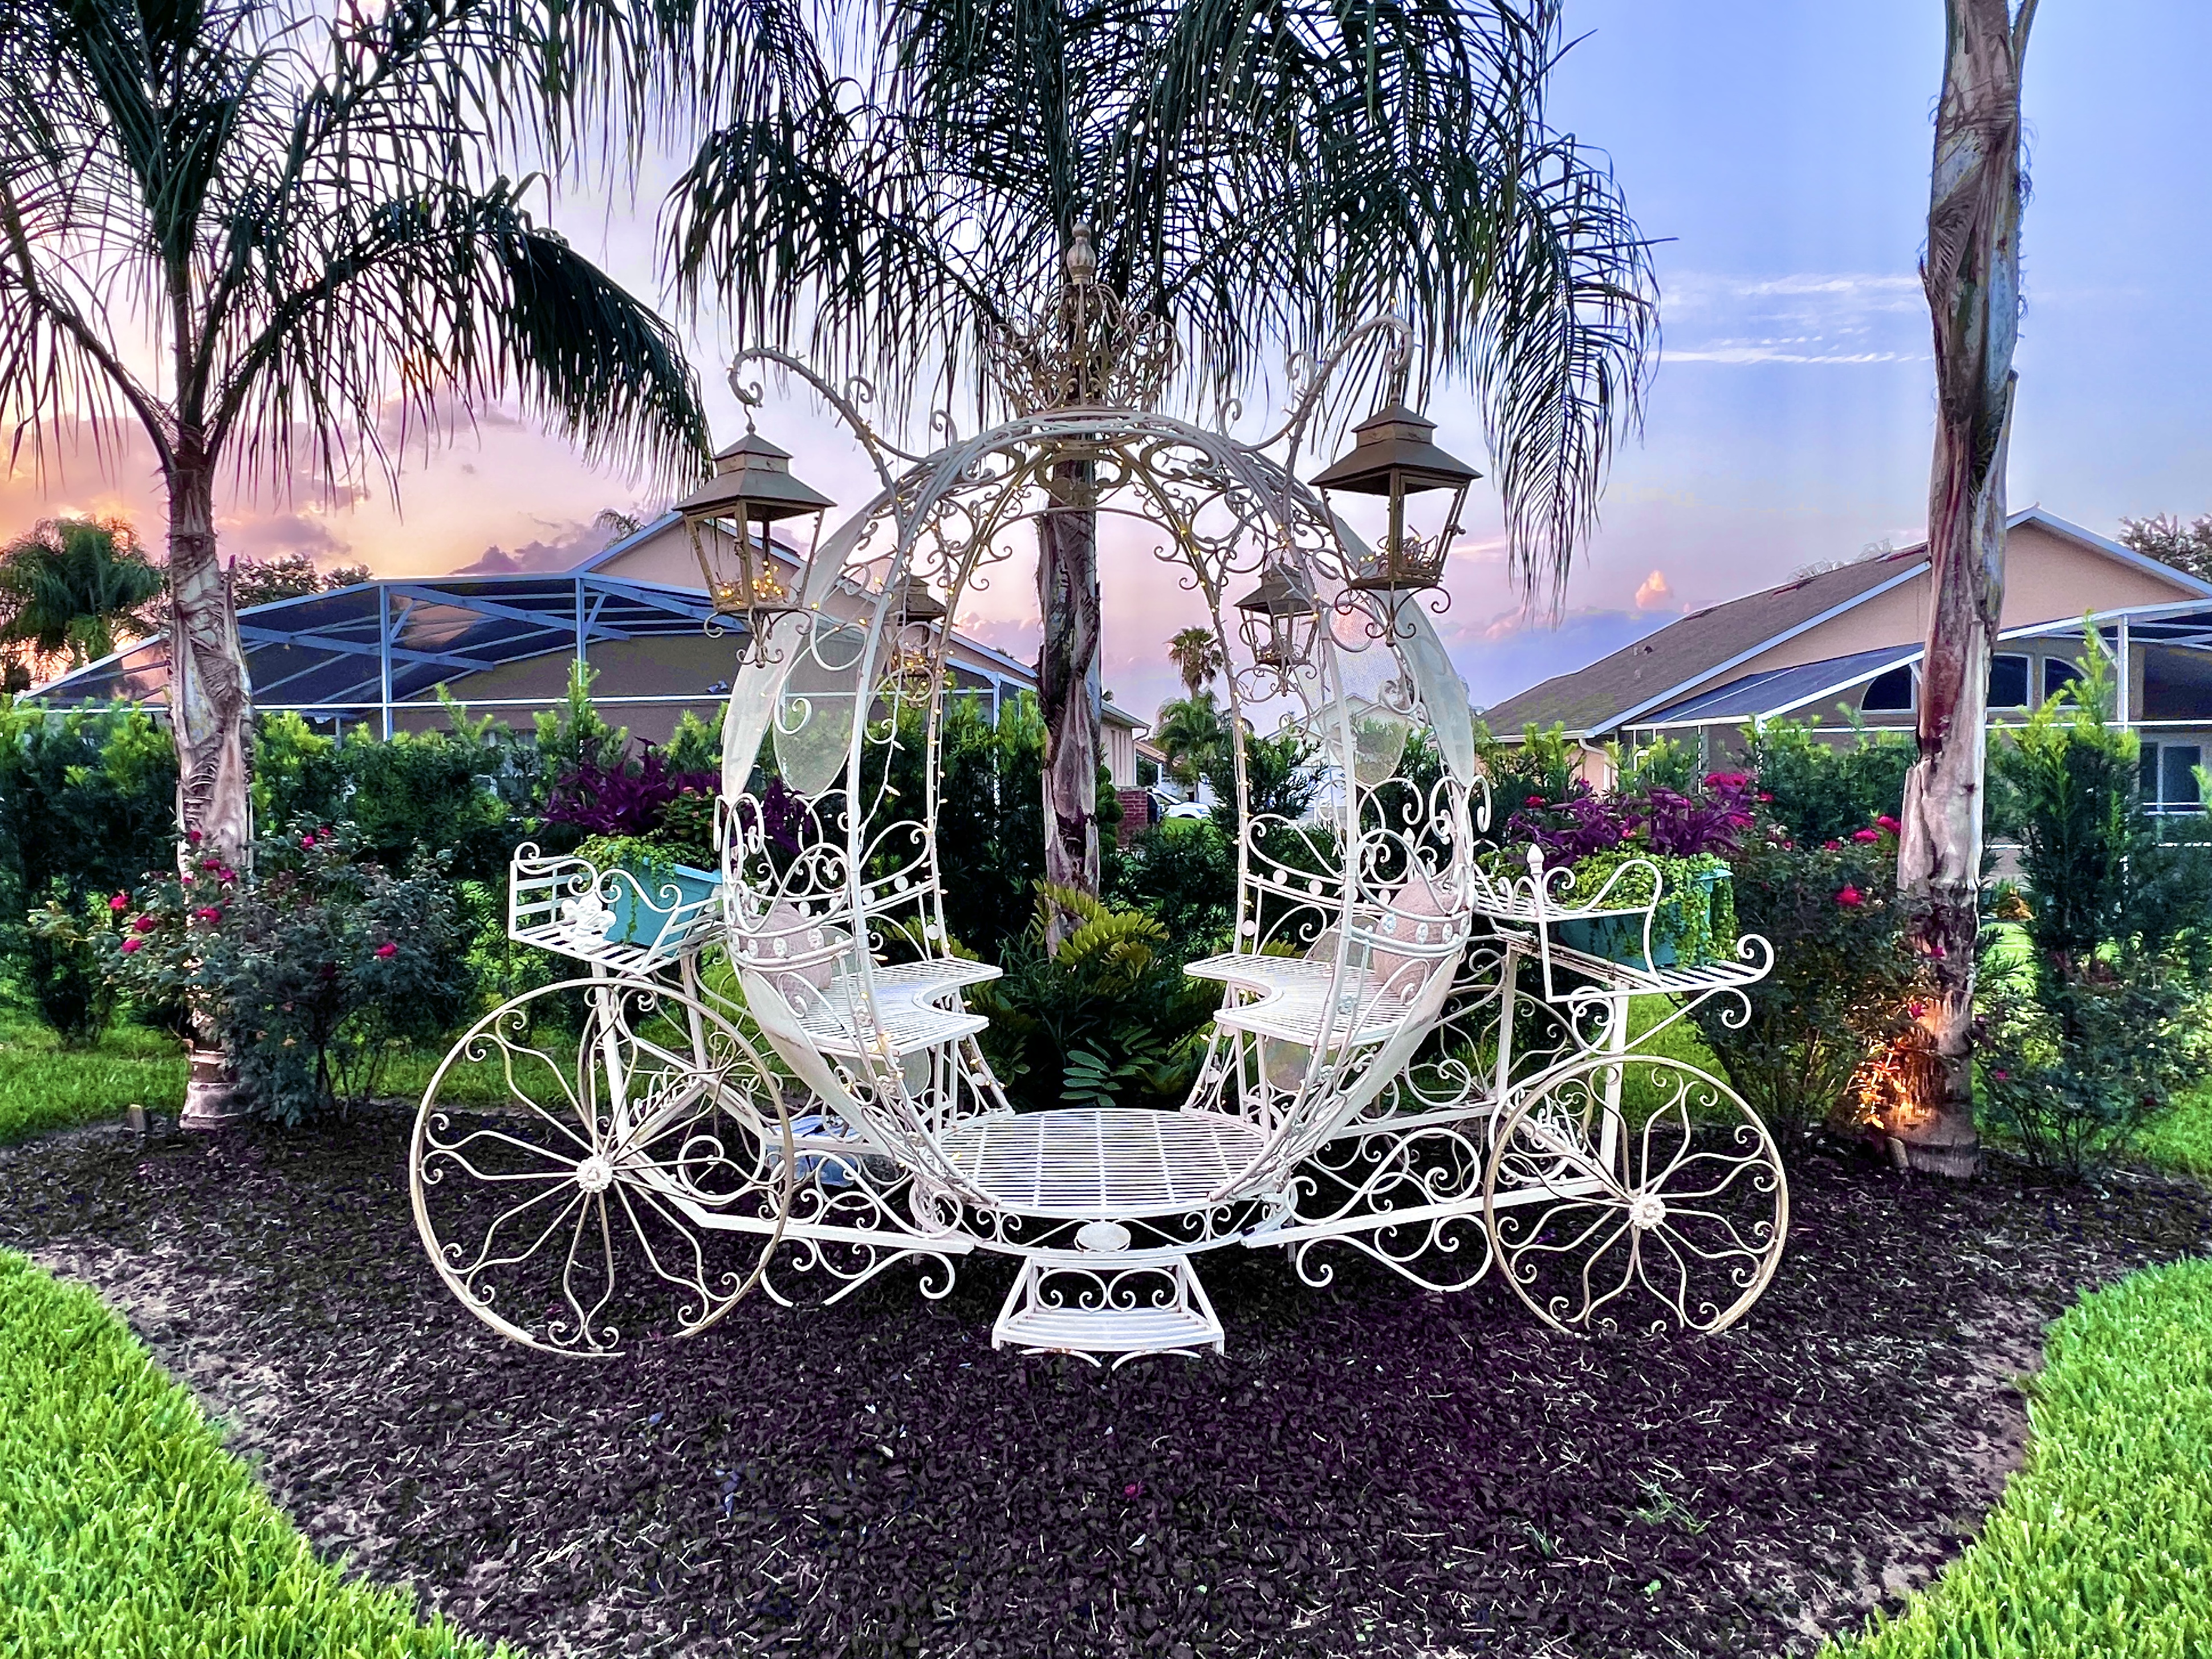 CINDERELLA's life-sized carriage is outside in the beautiful flower and palm tree gardens.  Find princess and prince costumes for the coolest family pics EVER!!!